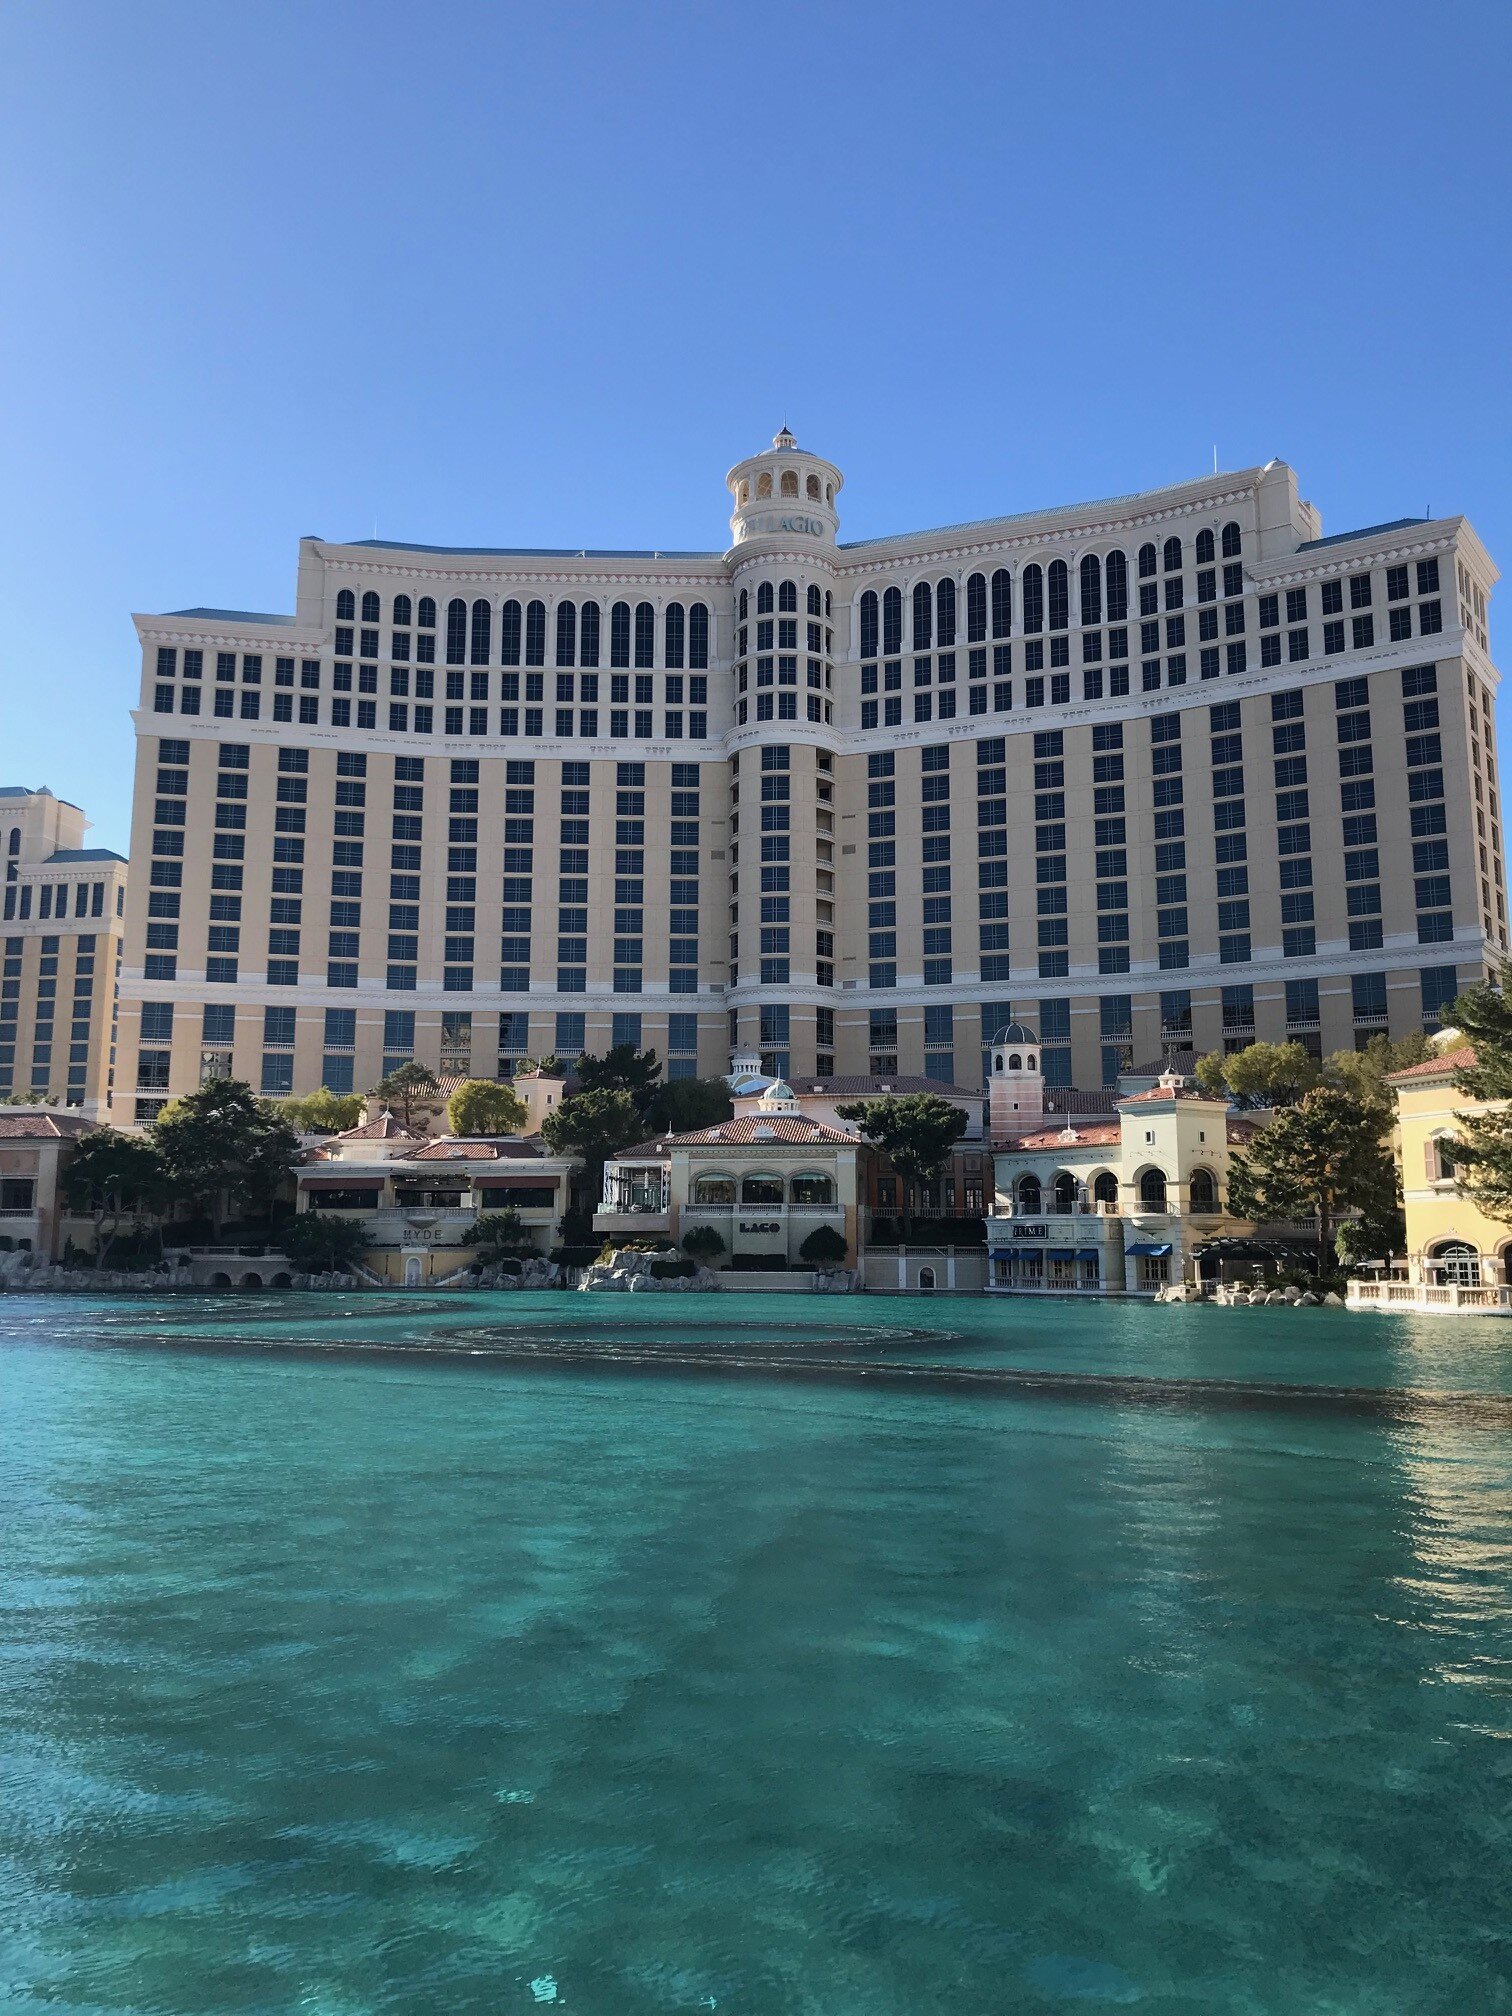 Las Vegas Travel Guide - Top things to do when in Las Vegas - Bellagio Fountains show every 15 mins on the quarter until midnight